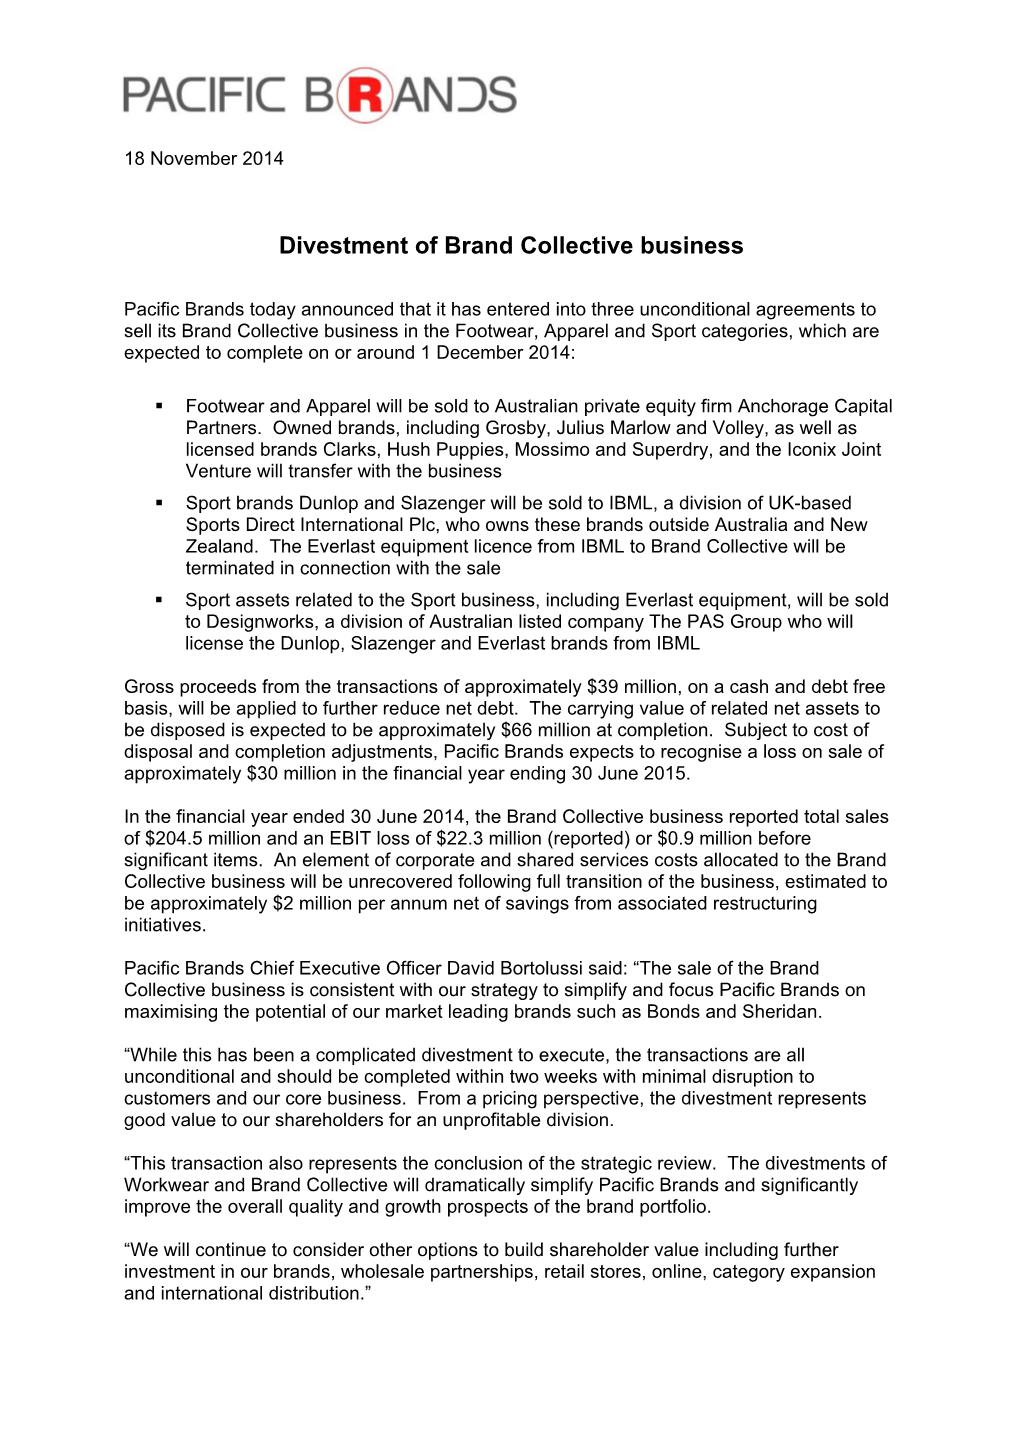 Divestment of Brand Collective Business